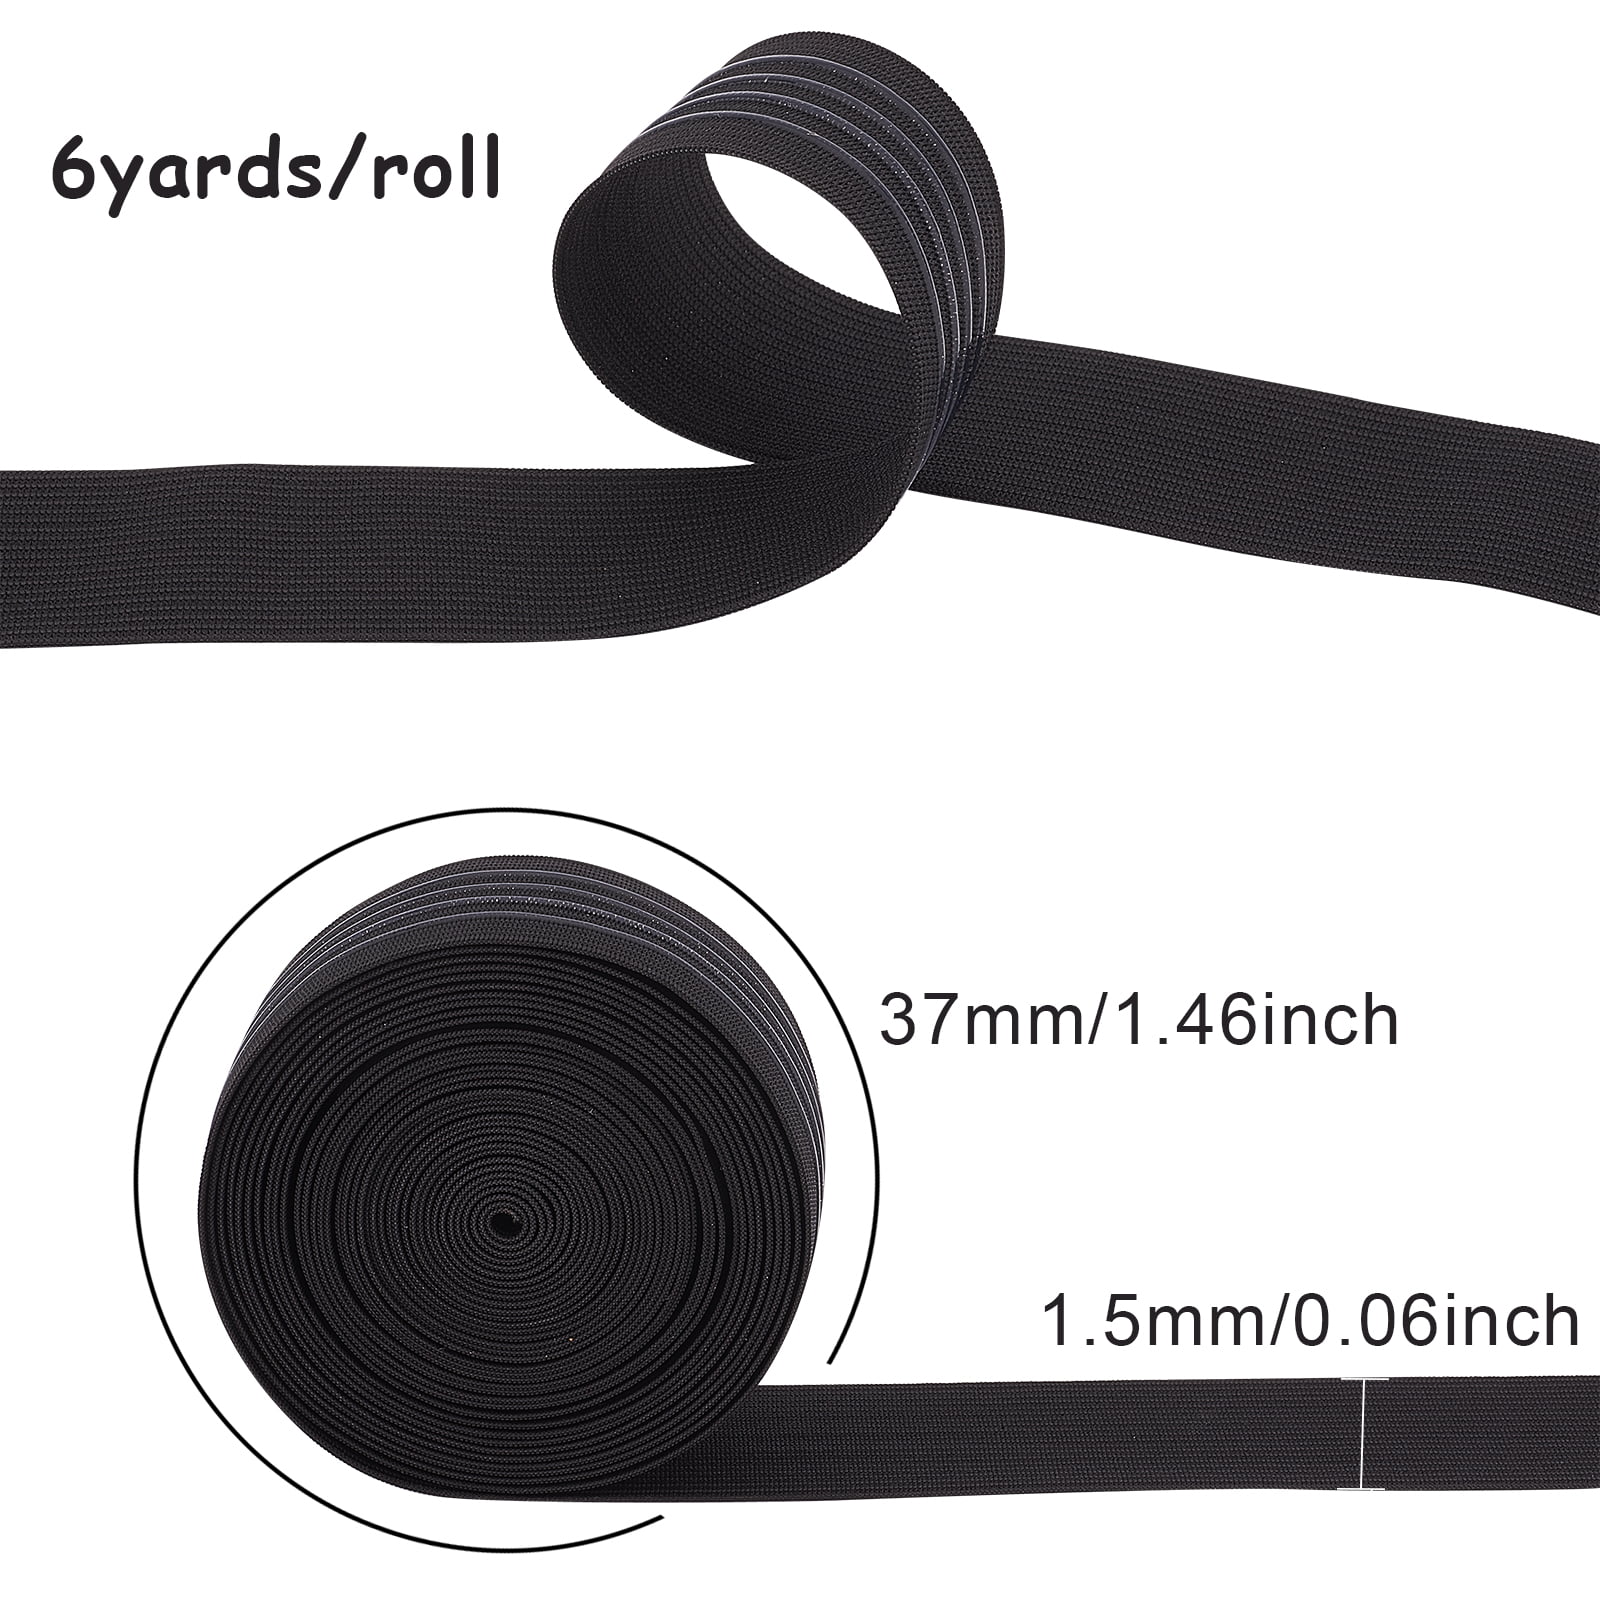 Wholesale GORGECRAFT 10Ydsx 1.2 Inch Black Non-Slip Silicone Elastic Gripper  Band Wave Tape Webbing Stretchy Strap Spool Wavy Band Roll Ribbon Flat  Waistband for Clothing Garment Shorts Project 